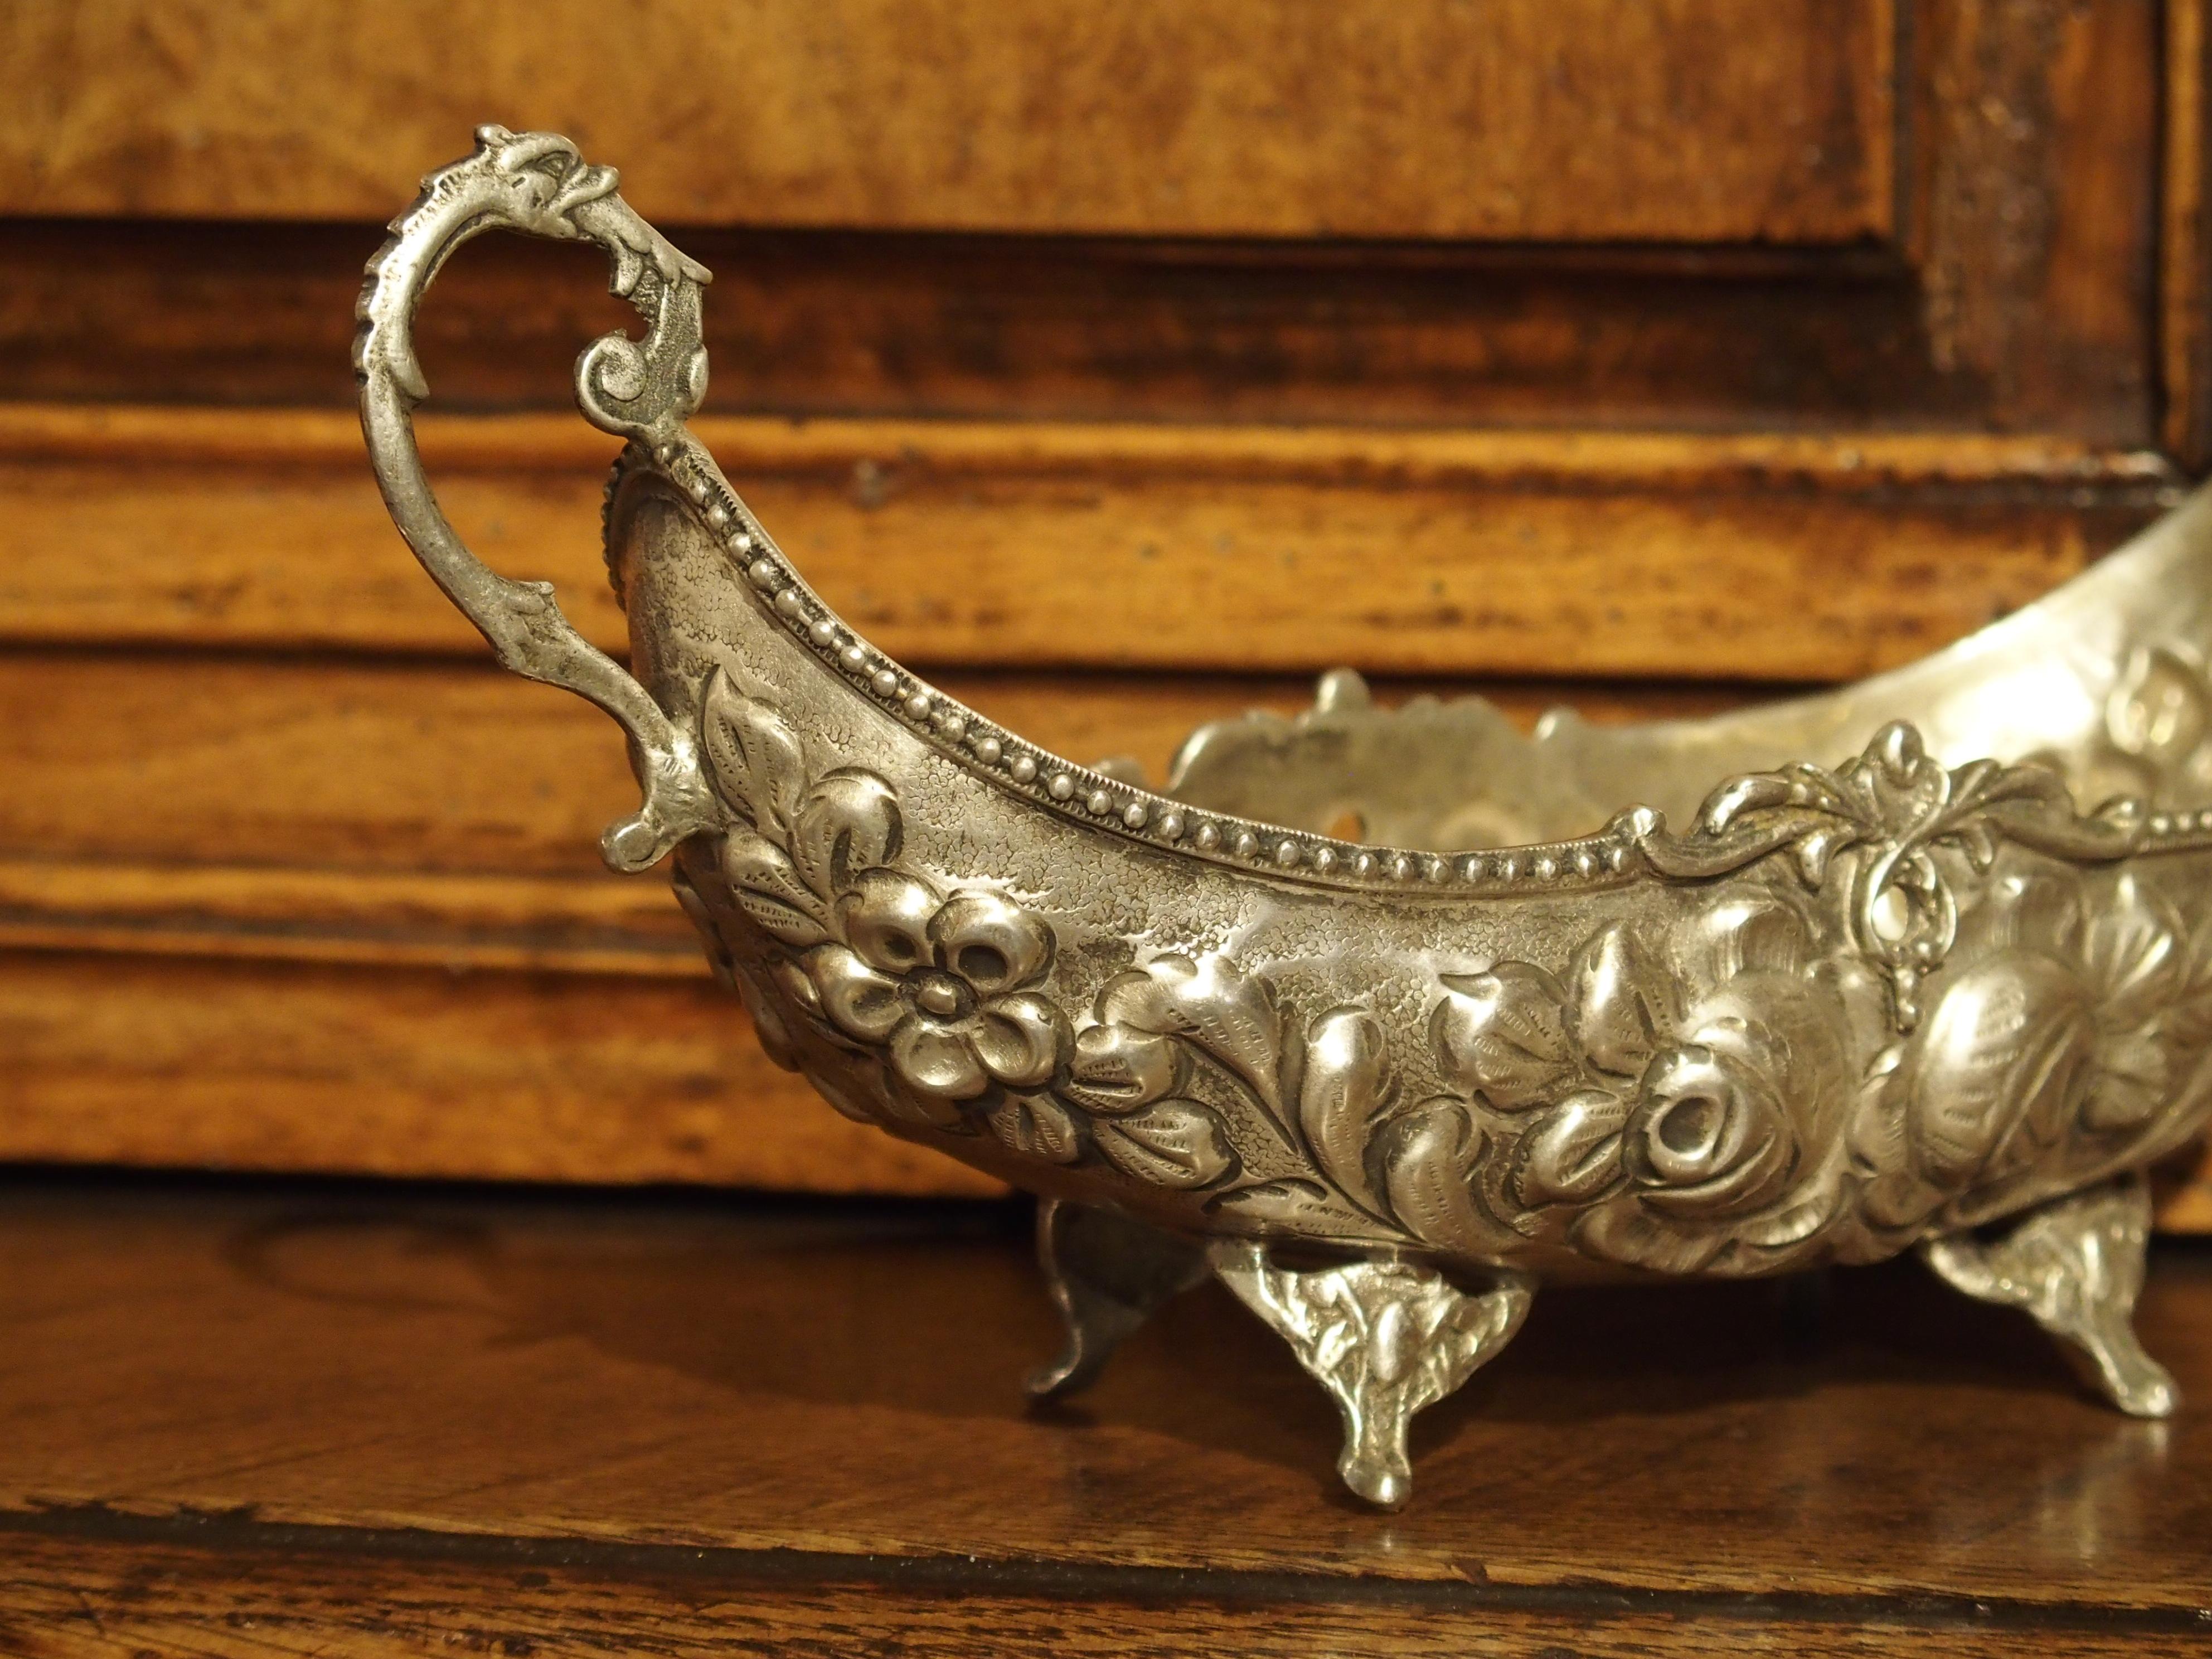 Early 20th Century Small Antique Silver Gondola Form Serving Bowl from Germany, circa 1900